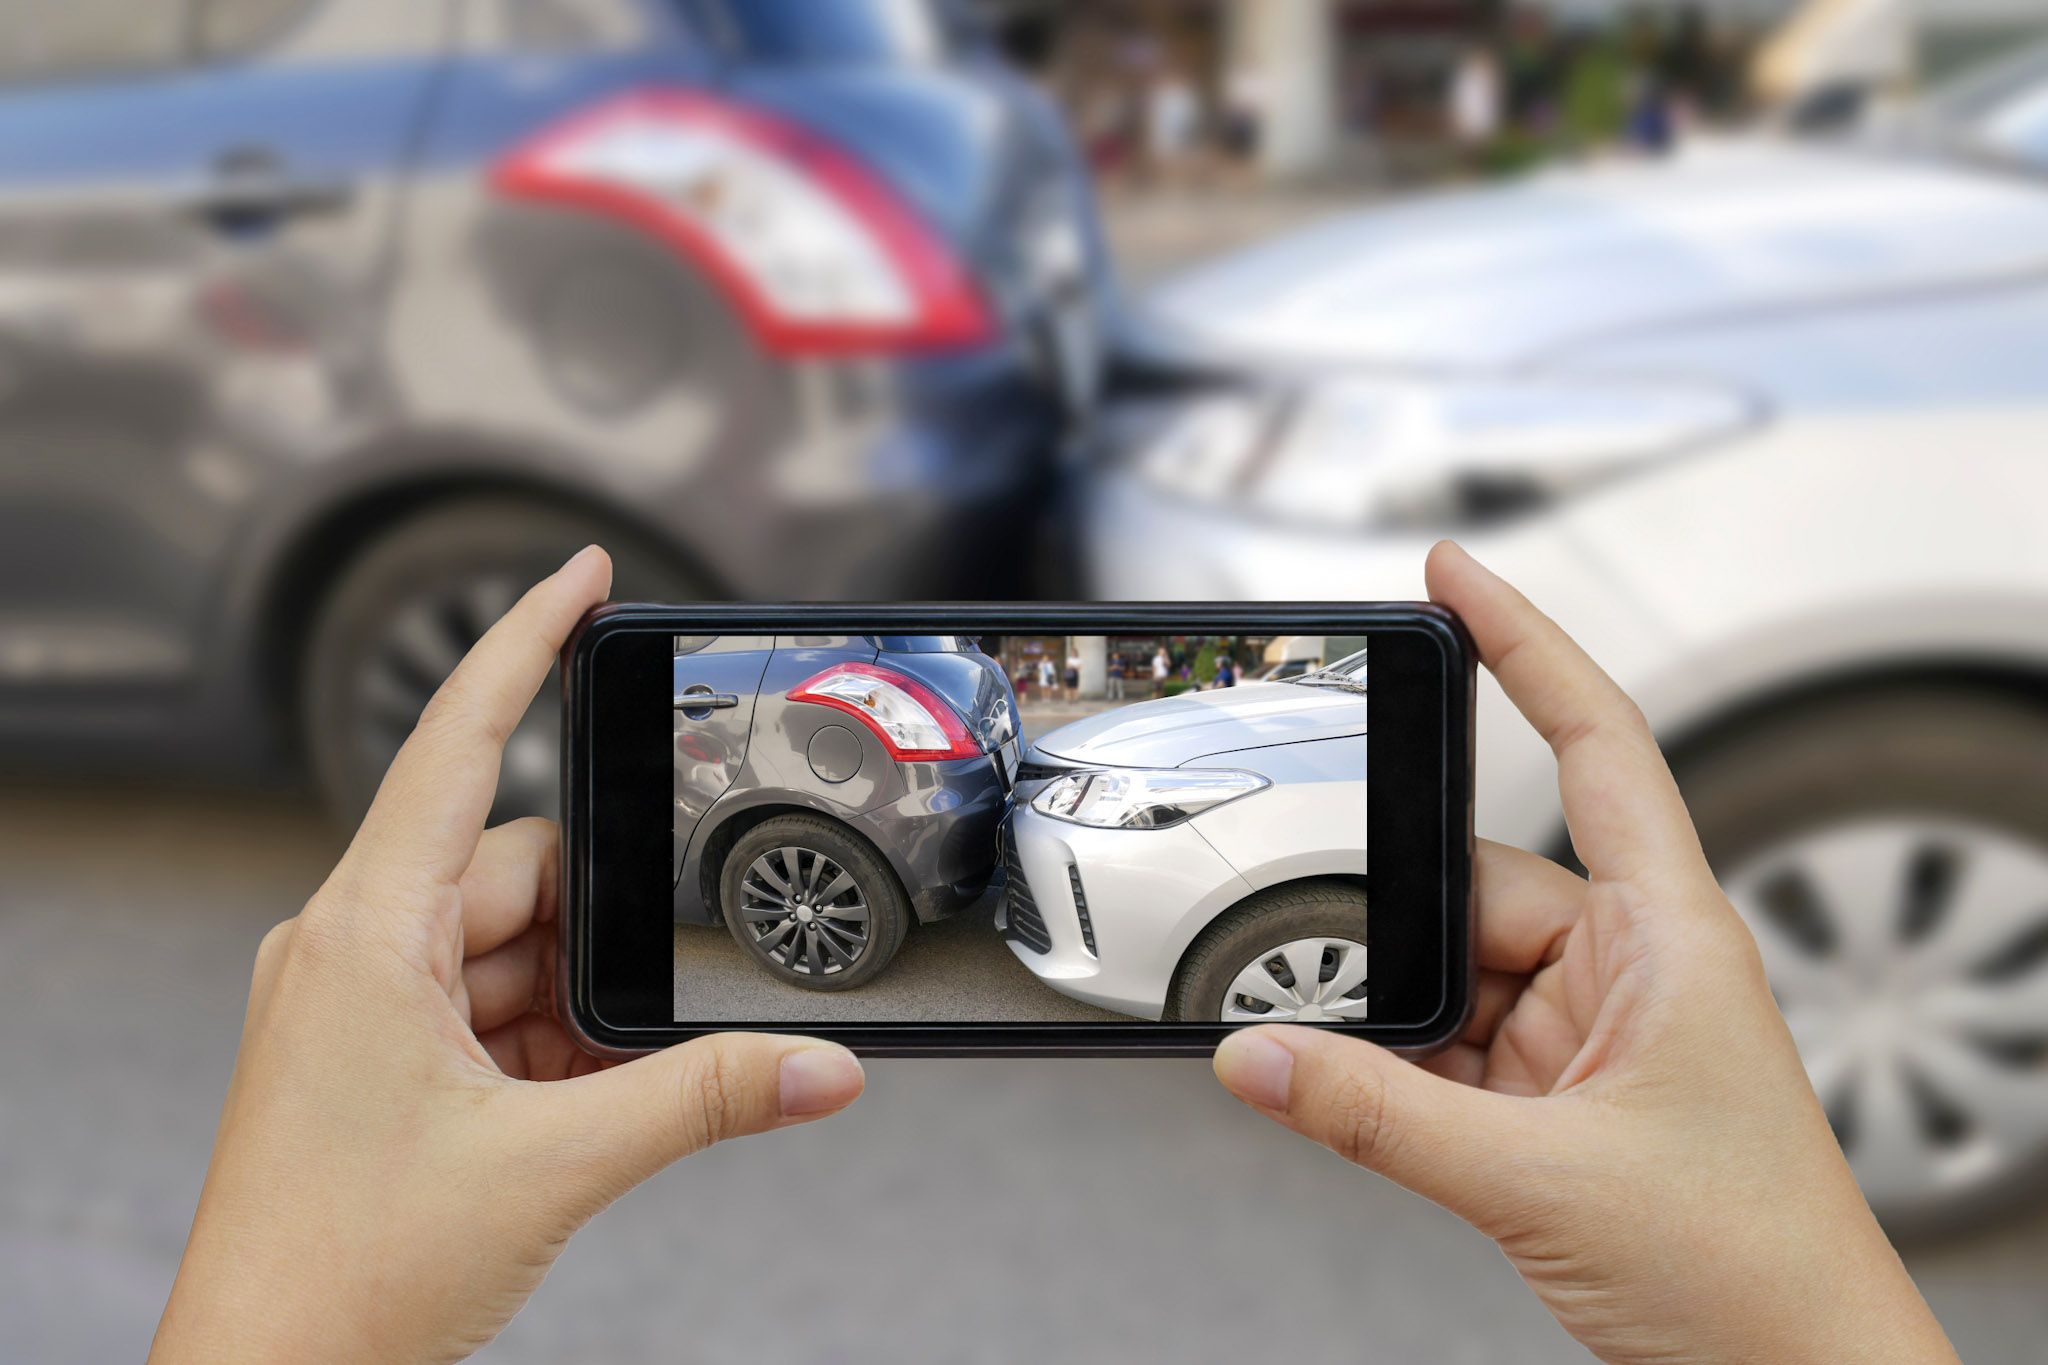 stock photo of a smartphone being used to photograph a minor traffic collision